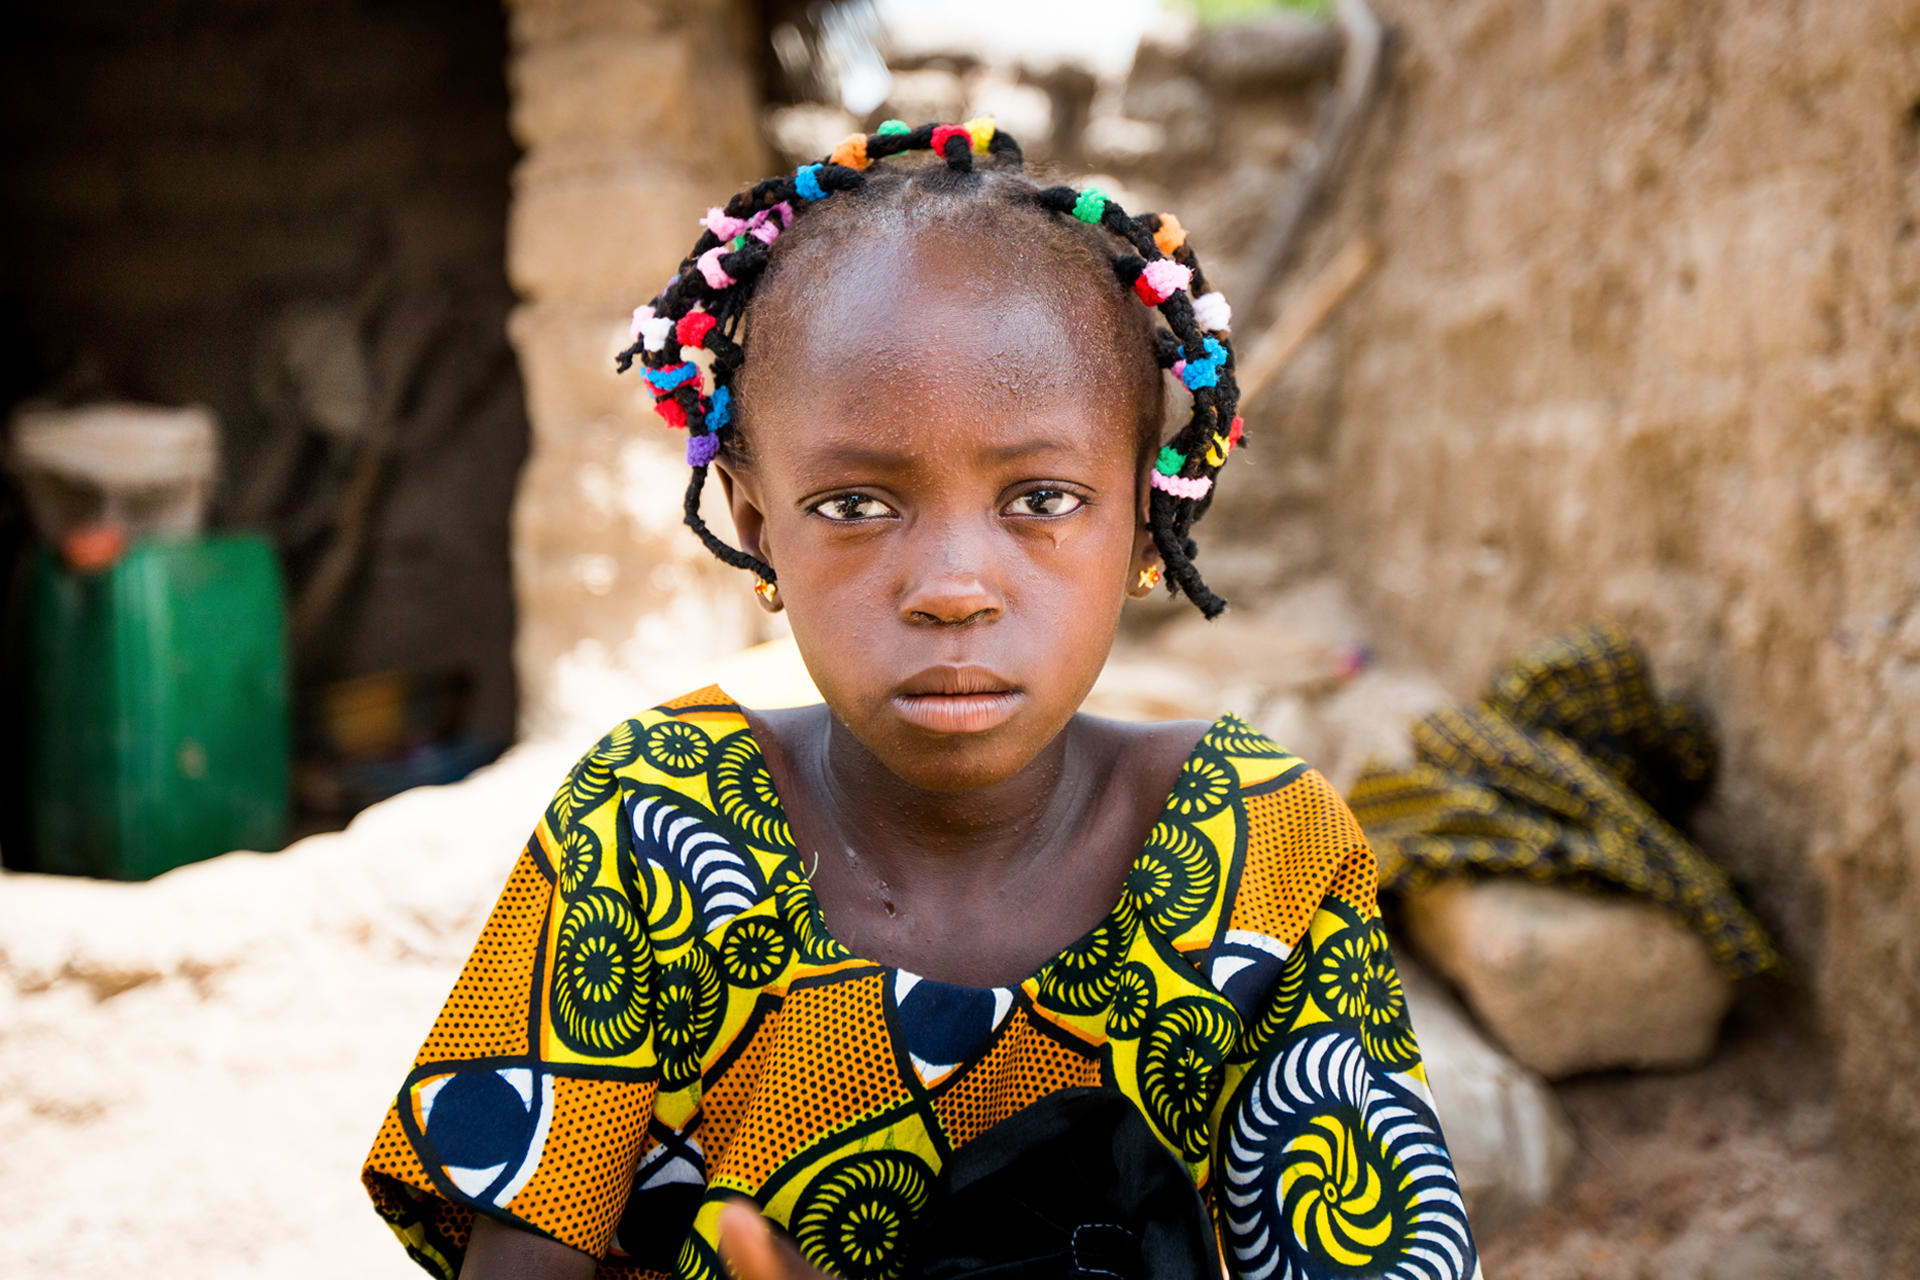 Young girl from Africa looks at the camera with a straight face. She is wearing a colourful dress and colourful beads in her hair.